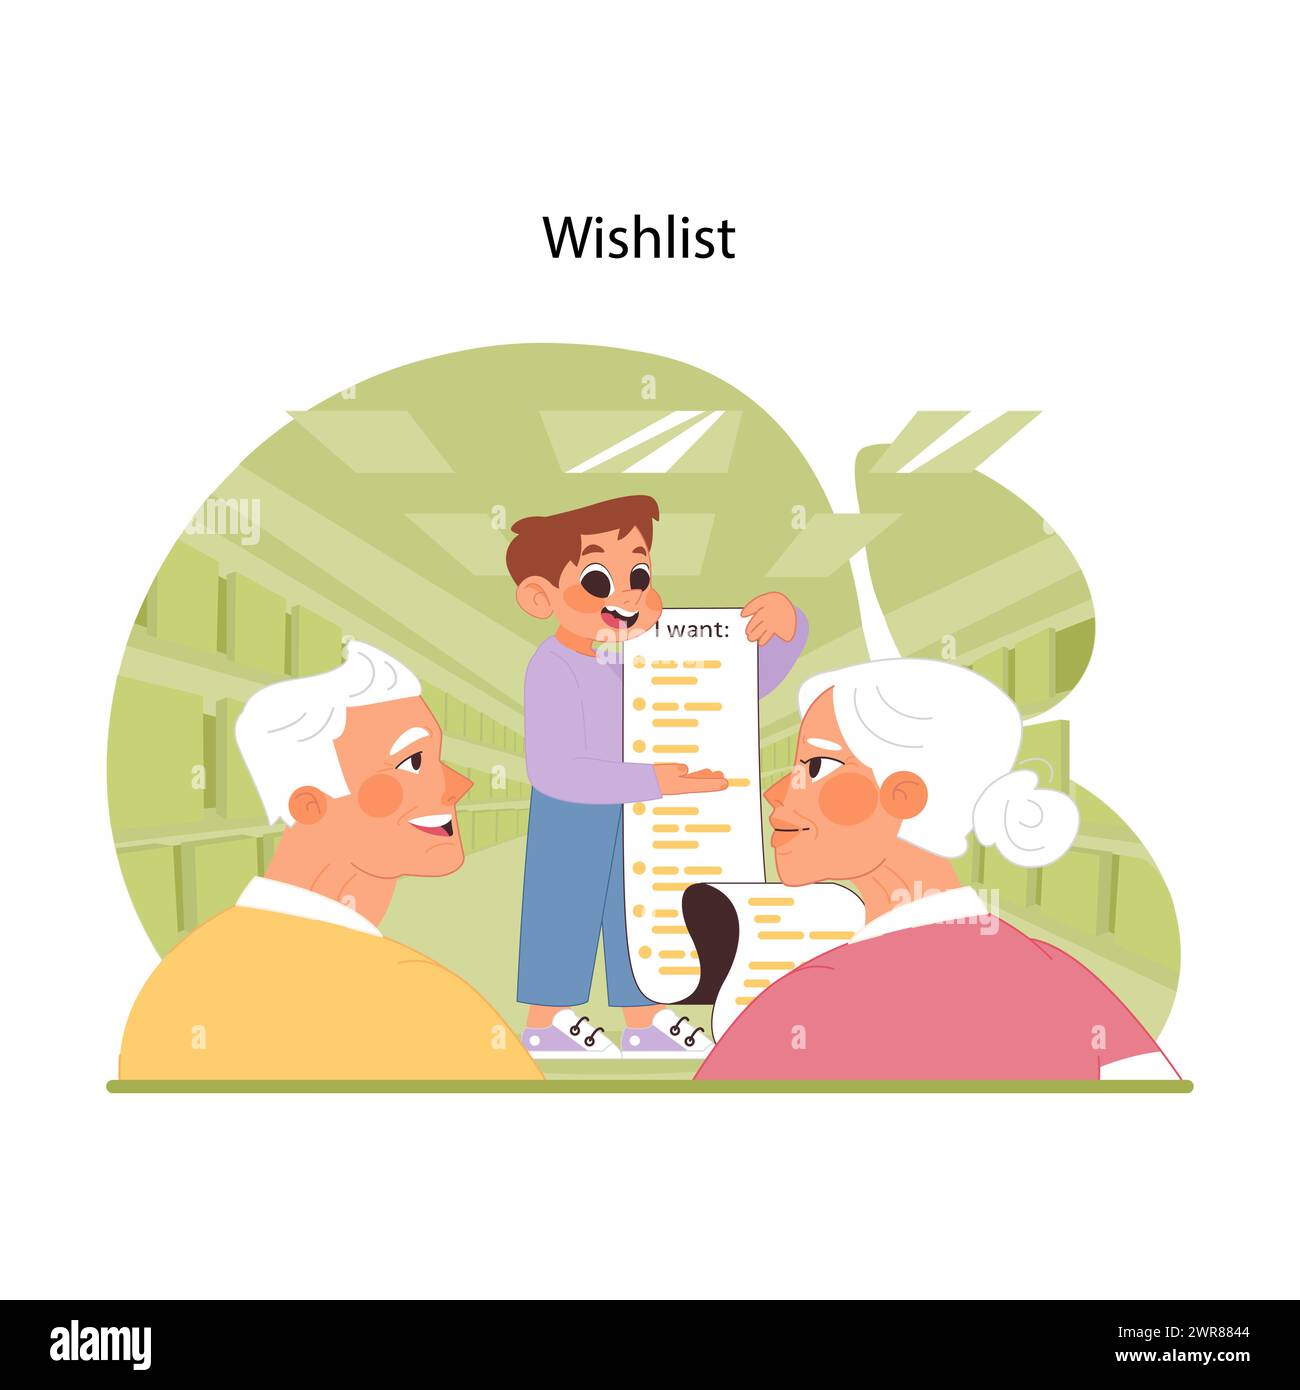 Wishlist sharing concept. Boy excitedly reveals his wishlist to adoring grandparents, old people watching closely. Sweet moment of family desires and expectations. Flat vector illustration Stock Vector